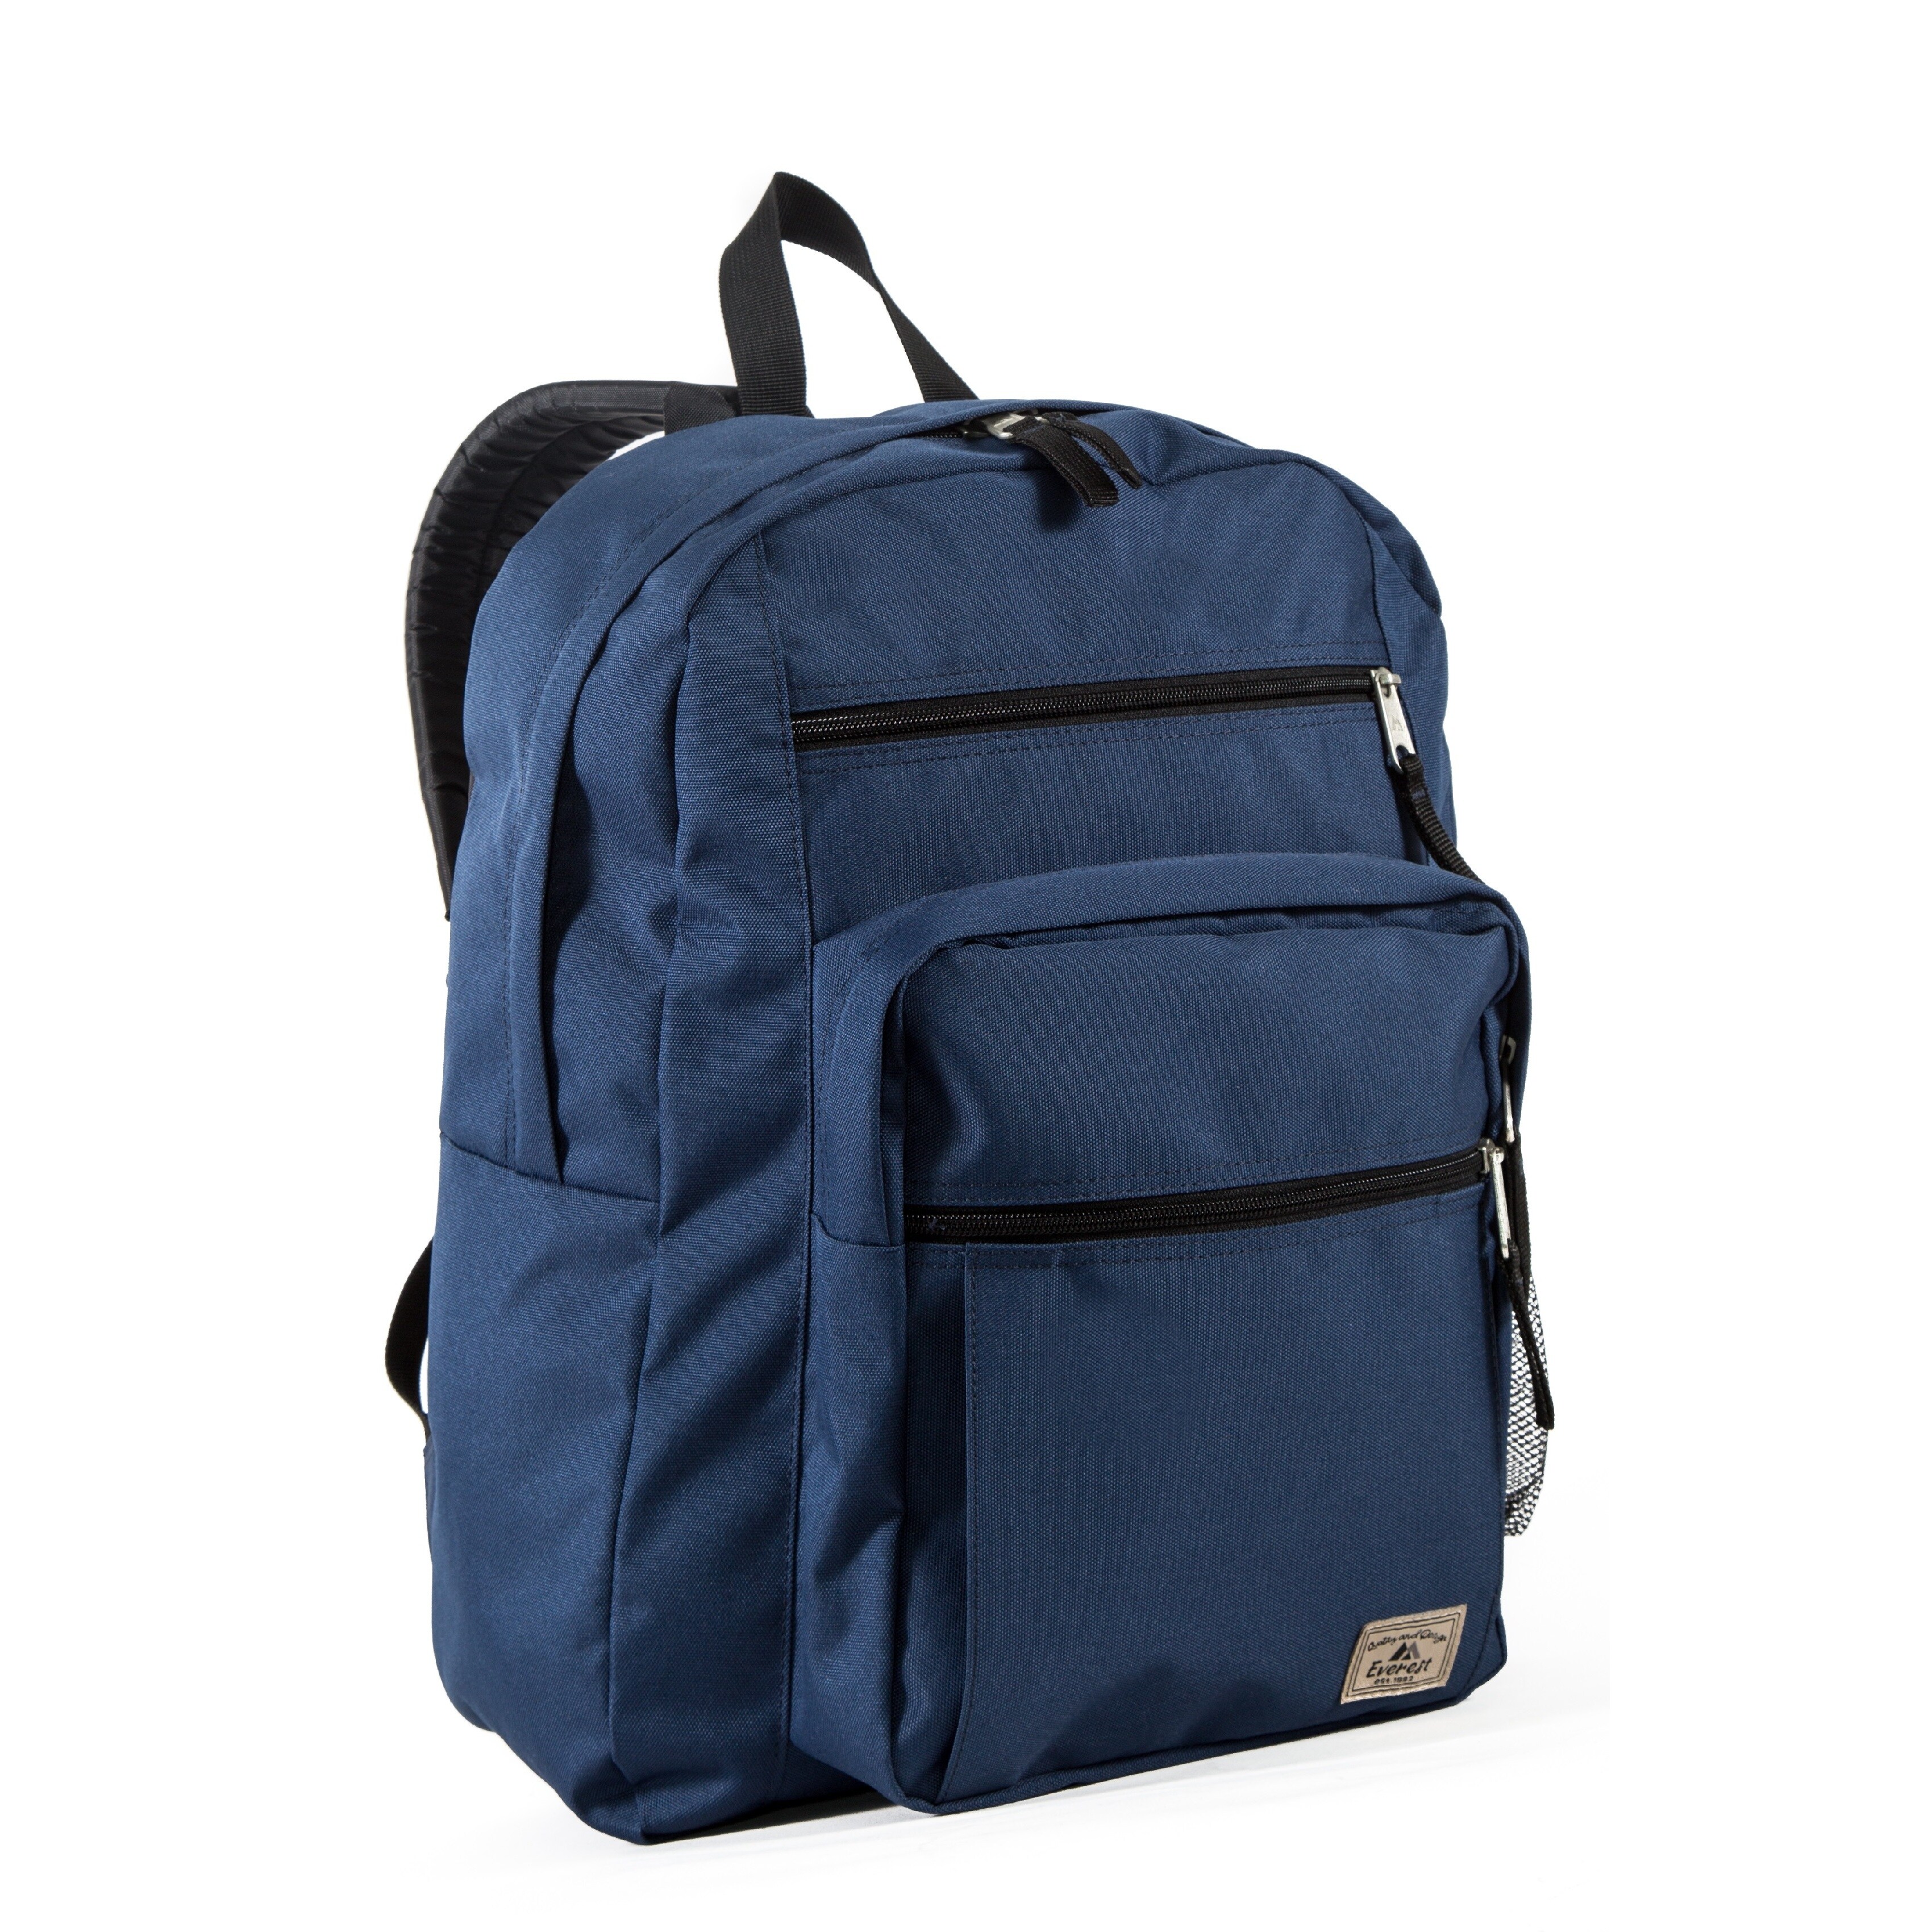 daypack with laptop compartment